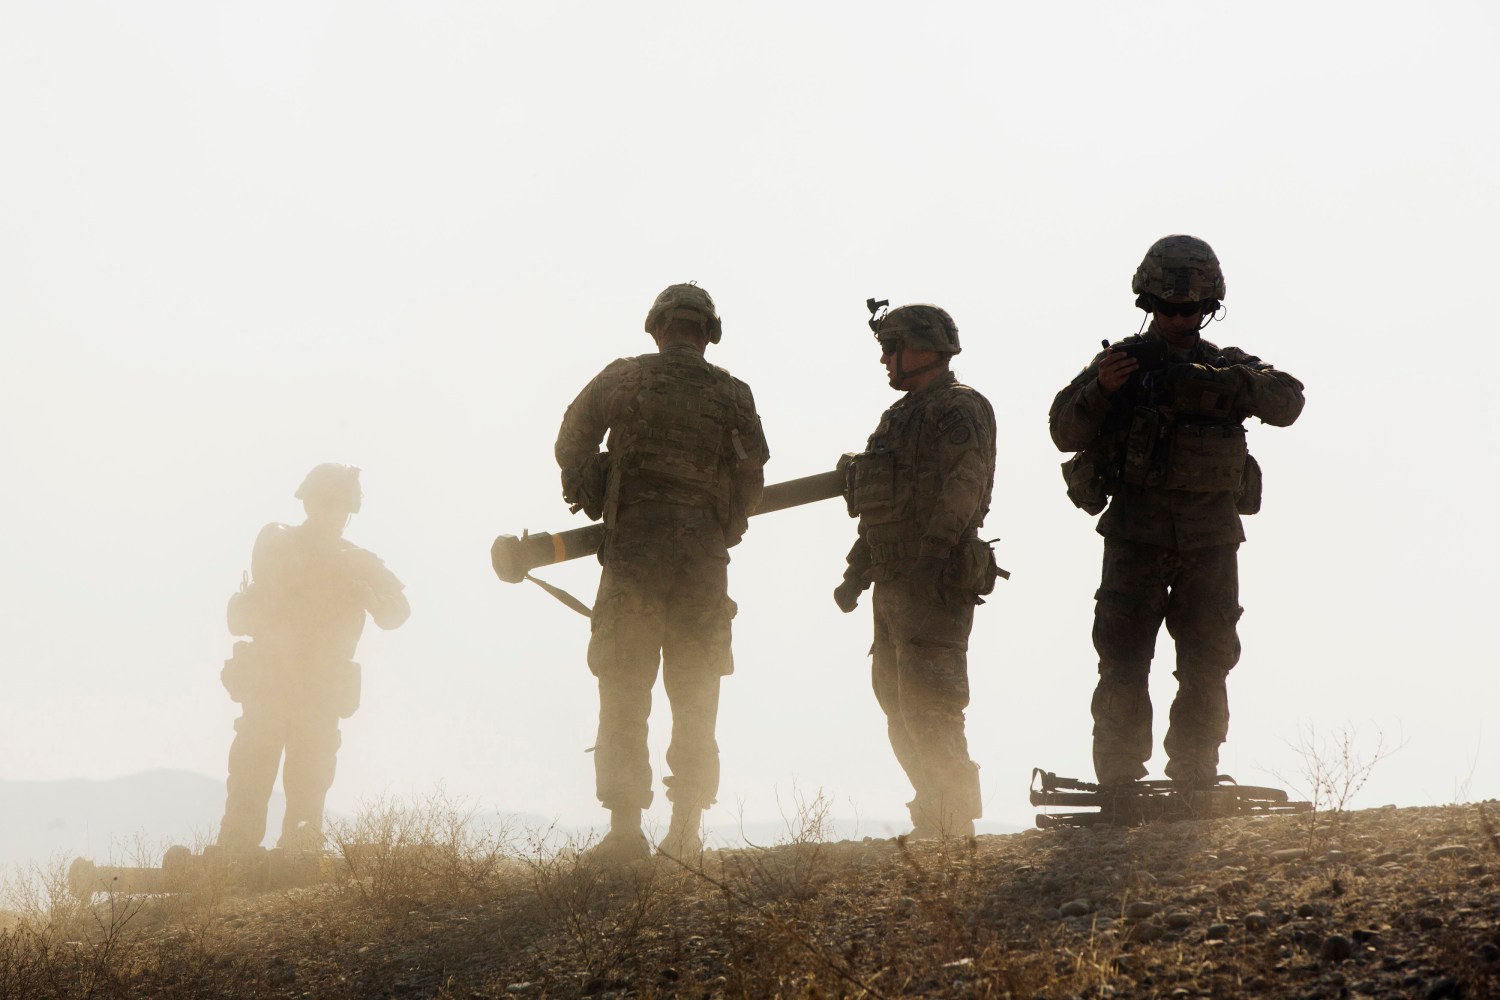 U.S. soldiers from D Troop of the 3rd Cavalry Regiment walk on hill after finishing with a training exercise near forward operating base Gamberi in the Laghman province of Afghanistan